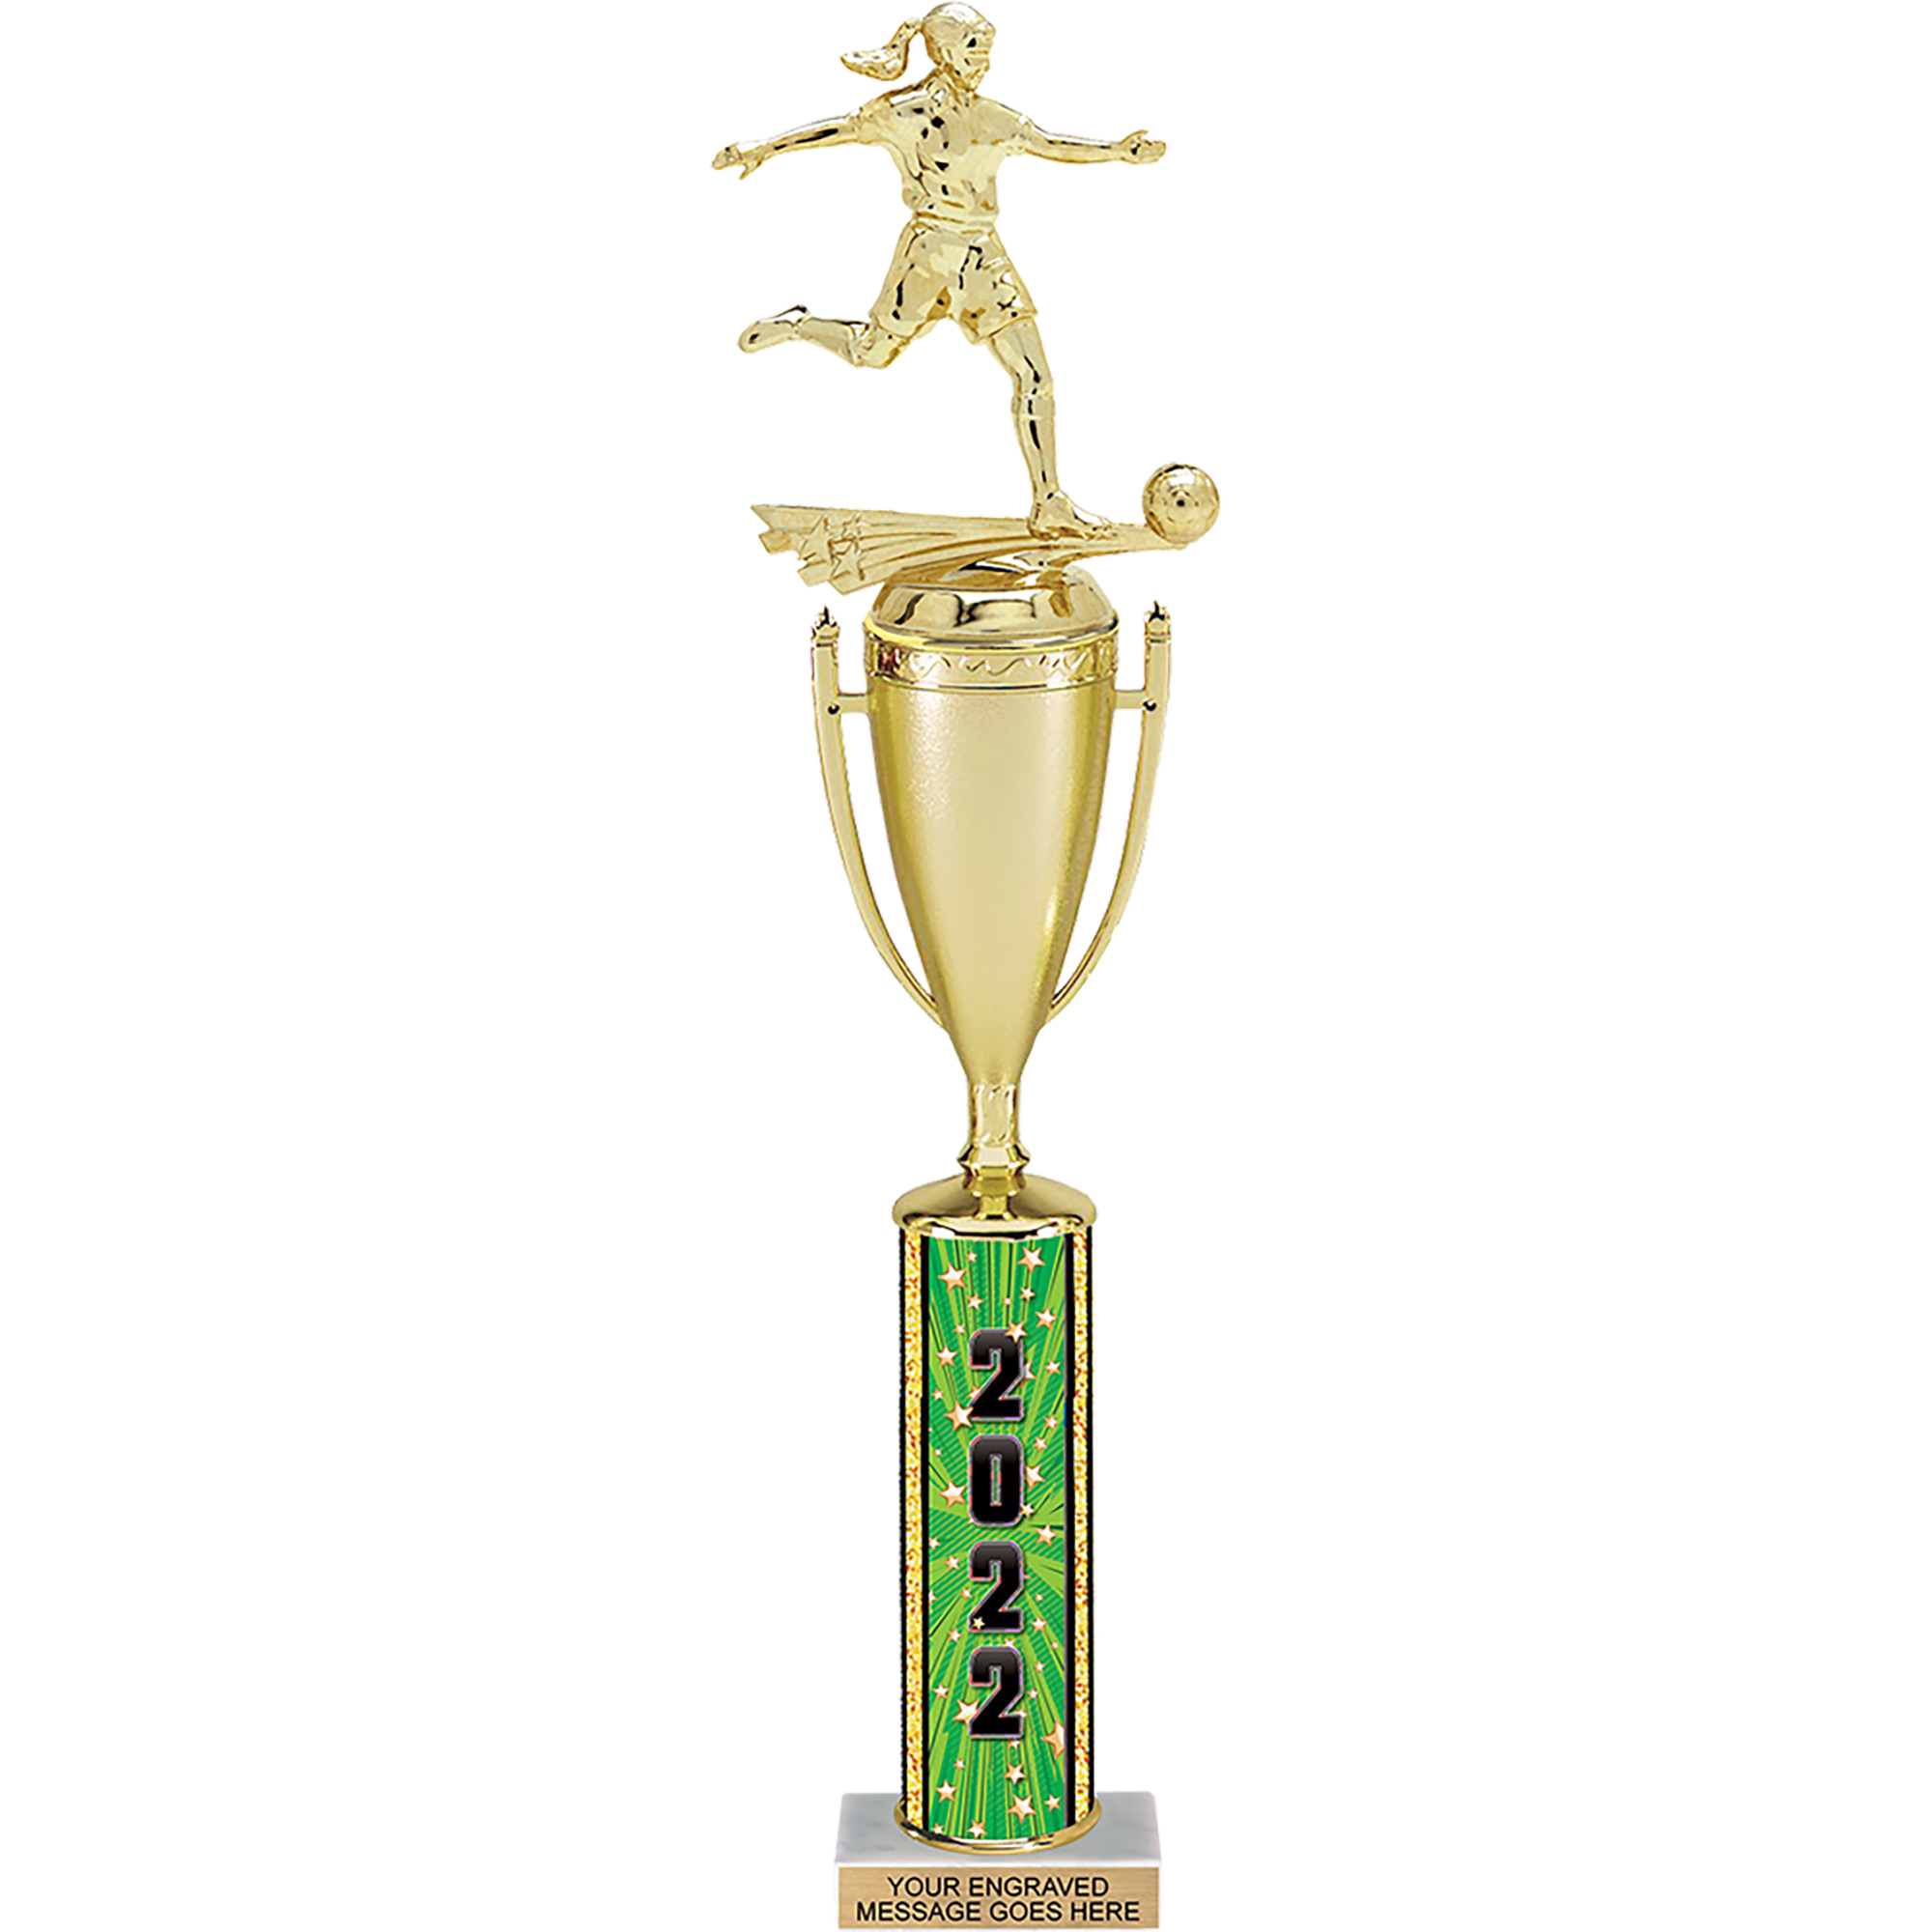 HALLOWEEN SPECIAL TROPHY GIFT AWARD ACRYLIC TROPHY *FREE ENGRAVING* 160mm *NEW* 